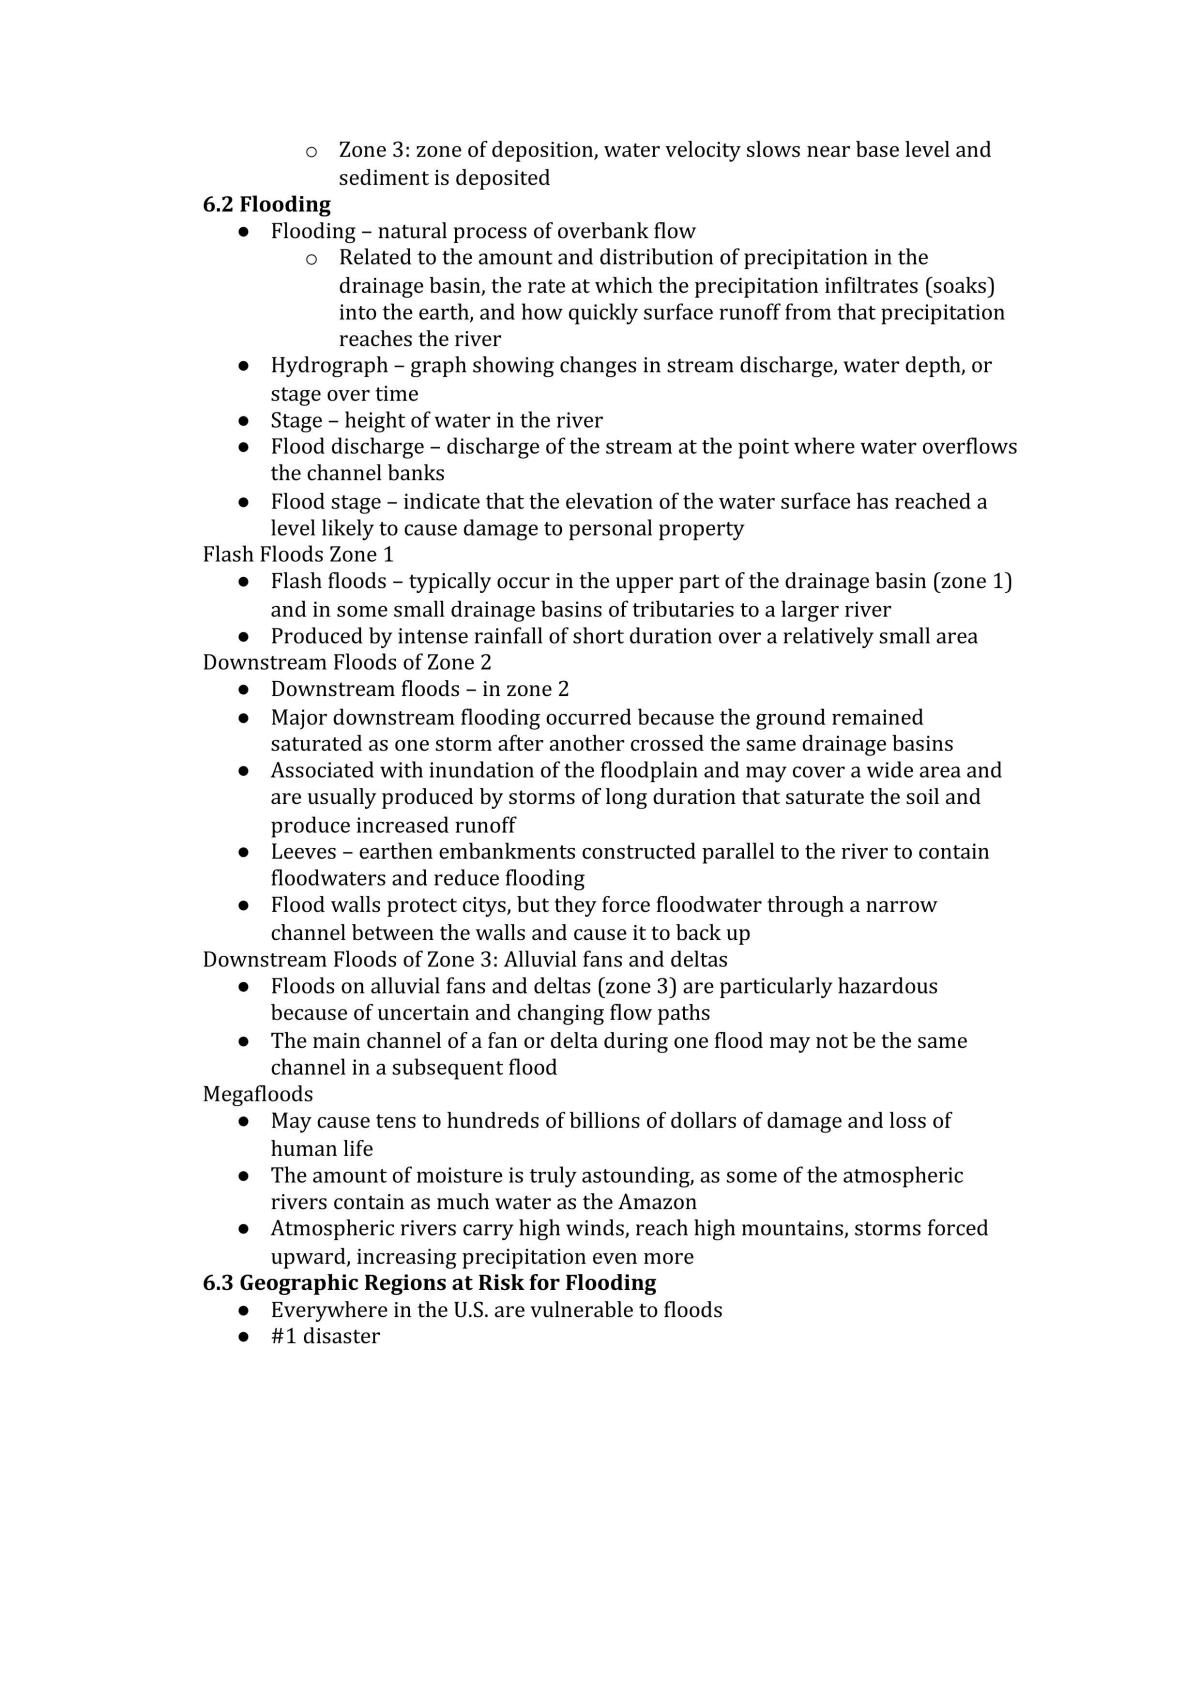 Geological Hazards and Their Human Impact Final Study Guide - Page 12